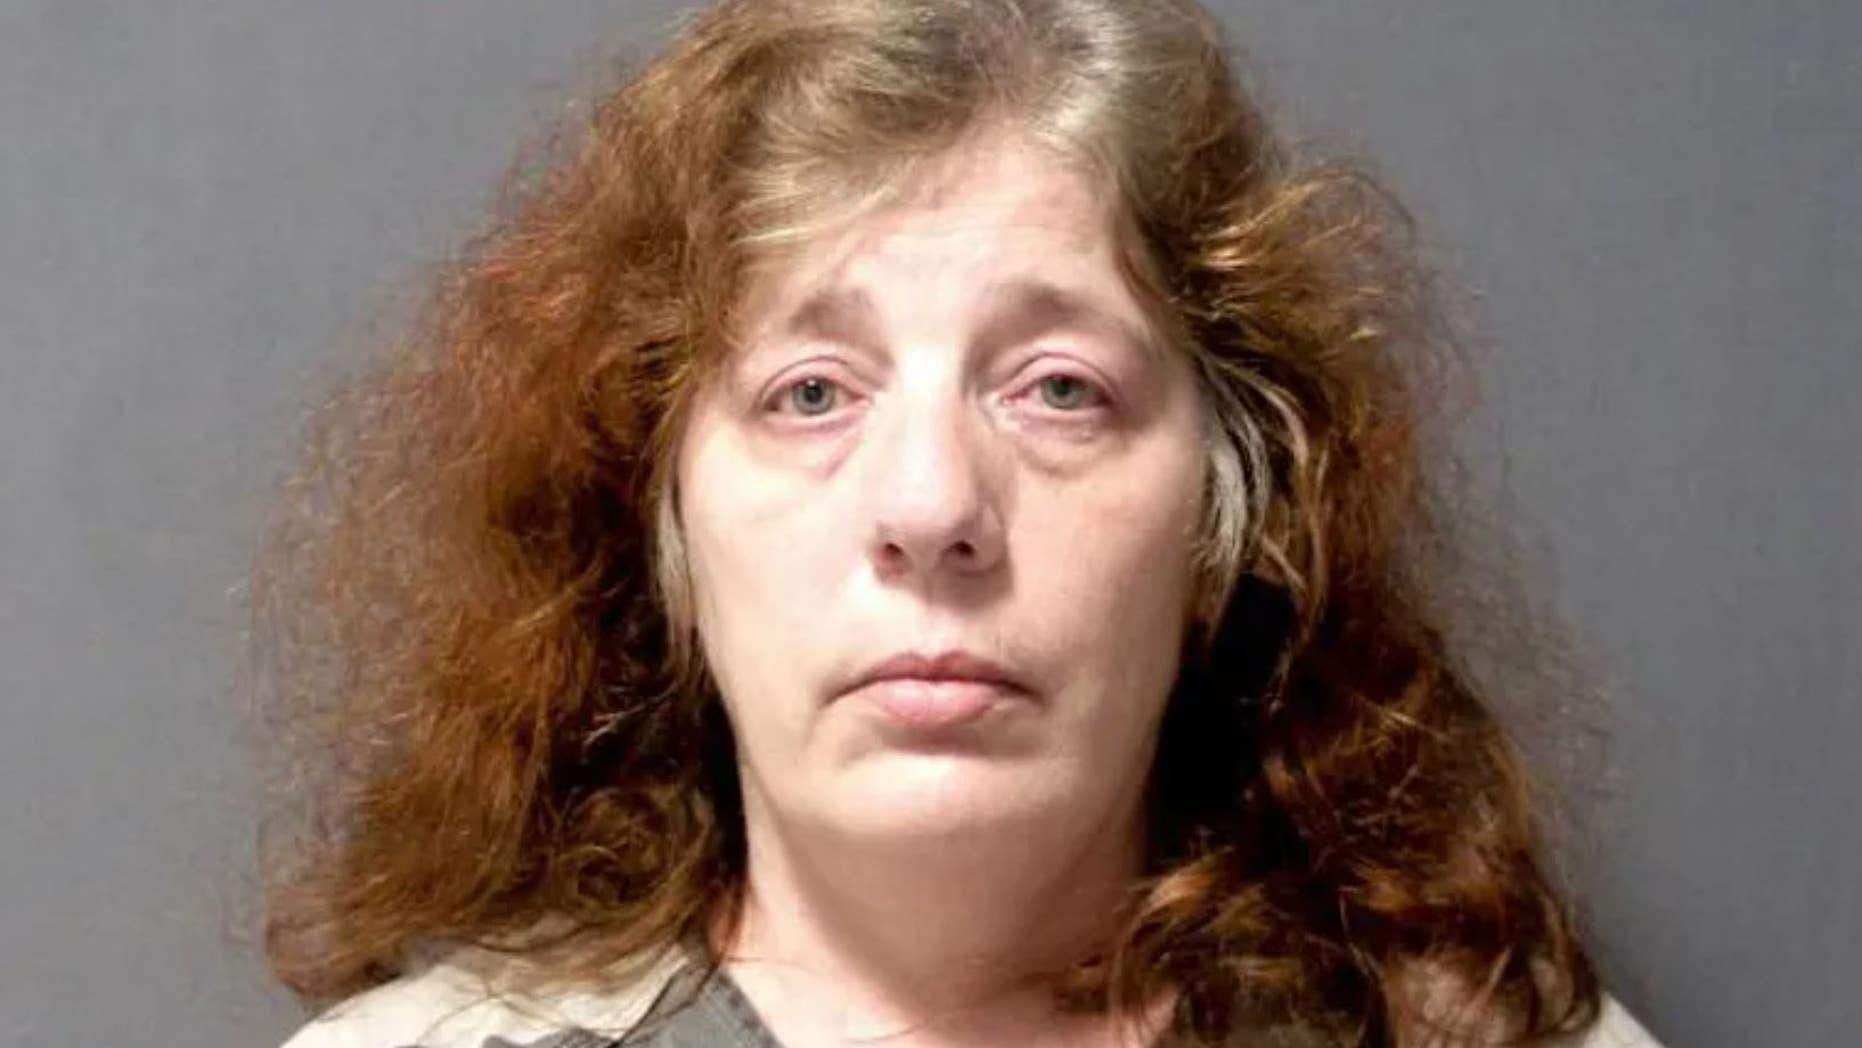 Michigan woman sentenced after trying to hire hitman for husband online